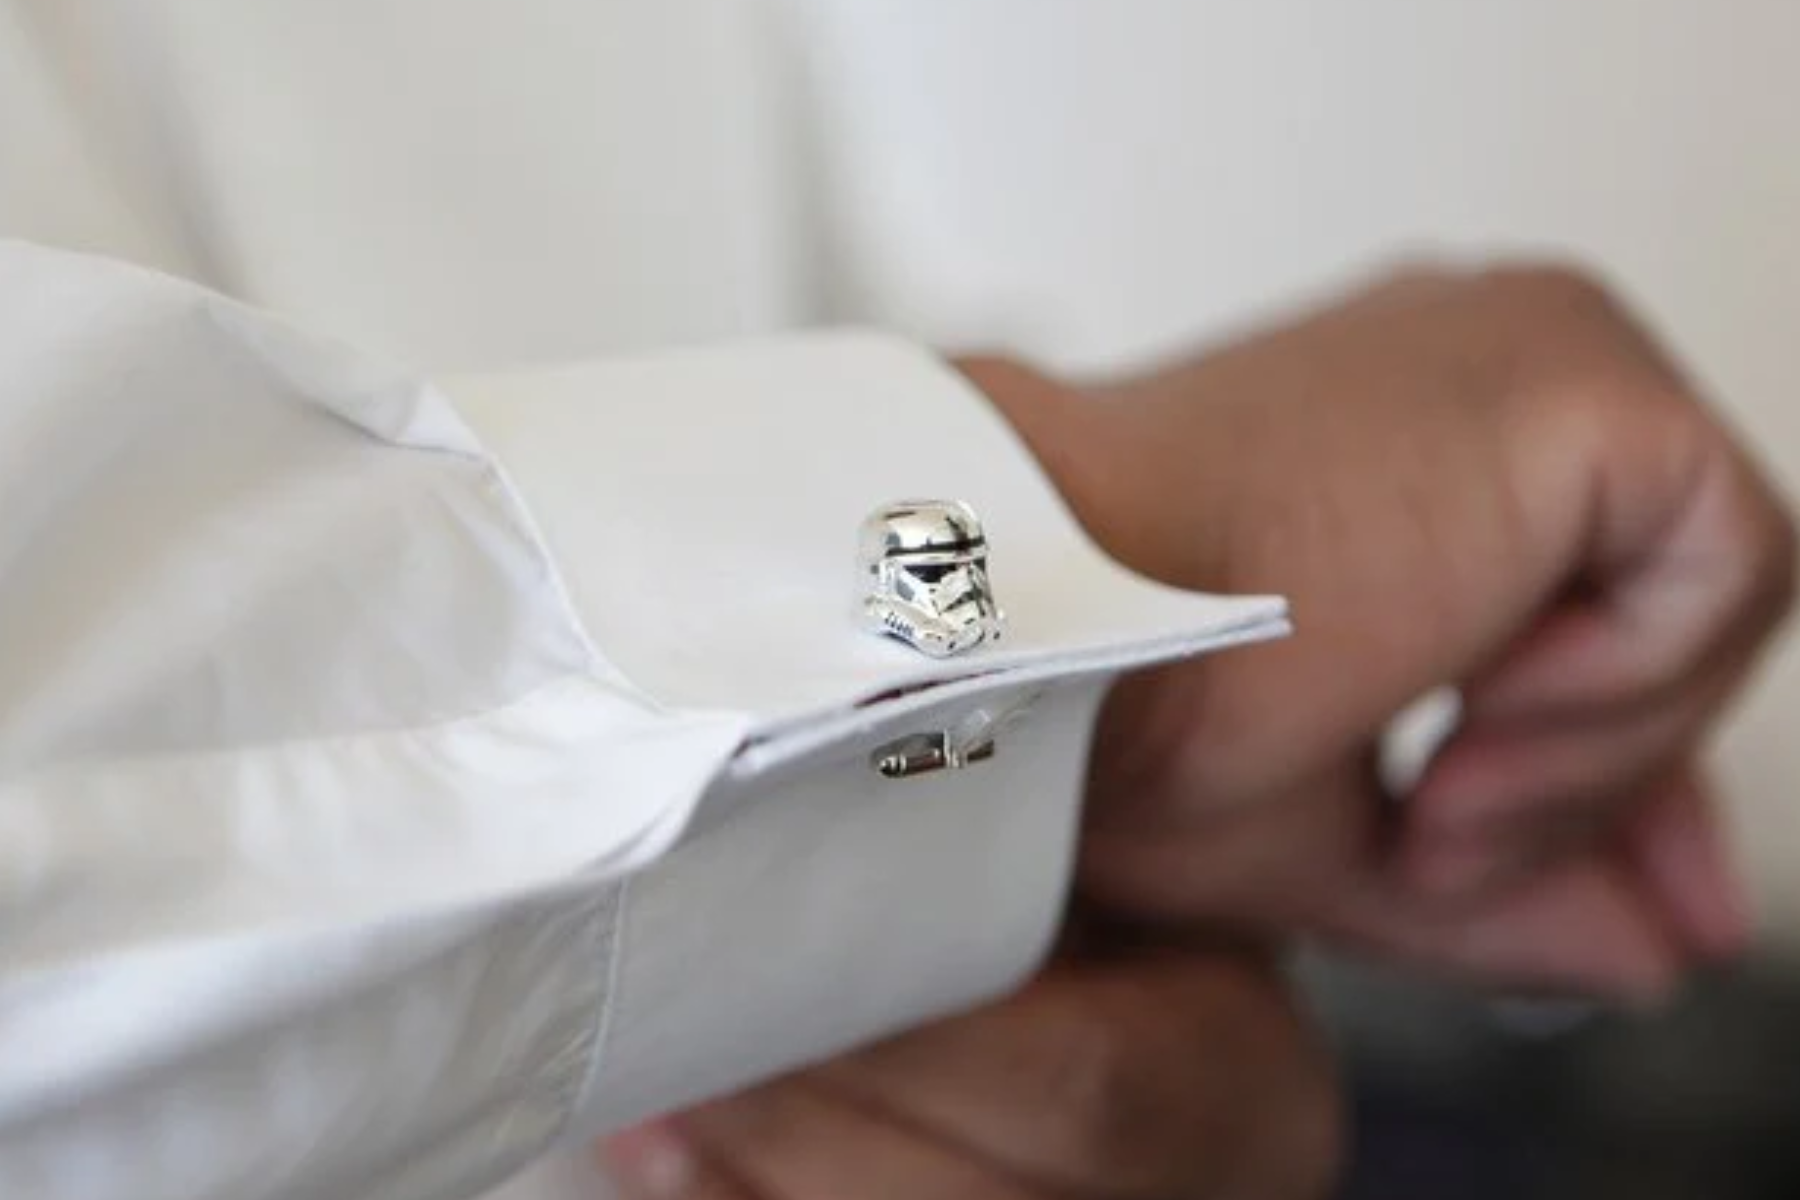 Star Wars Cufflinks For Men - From Work To Play